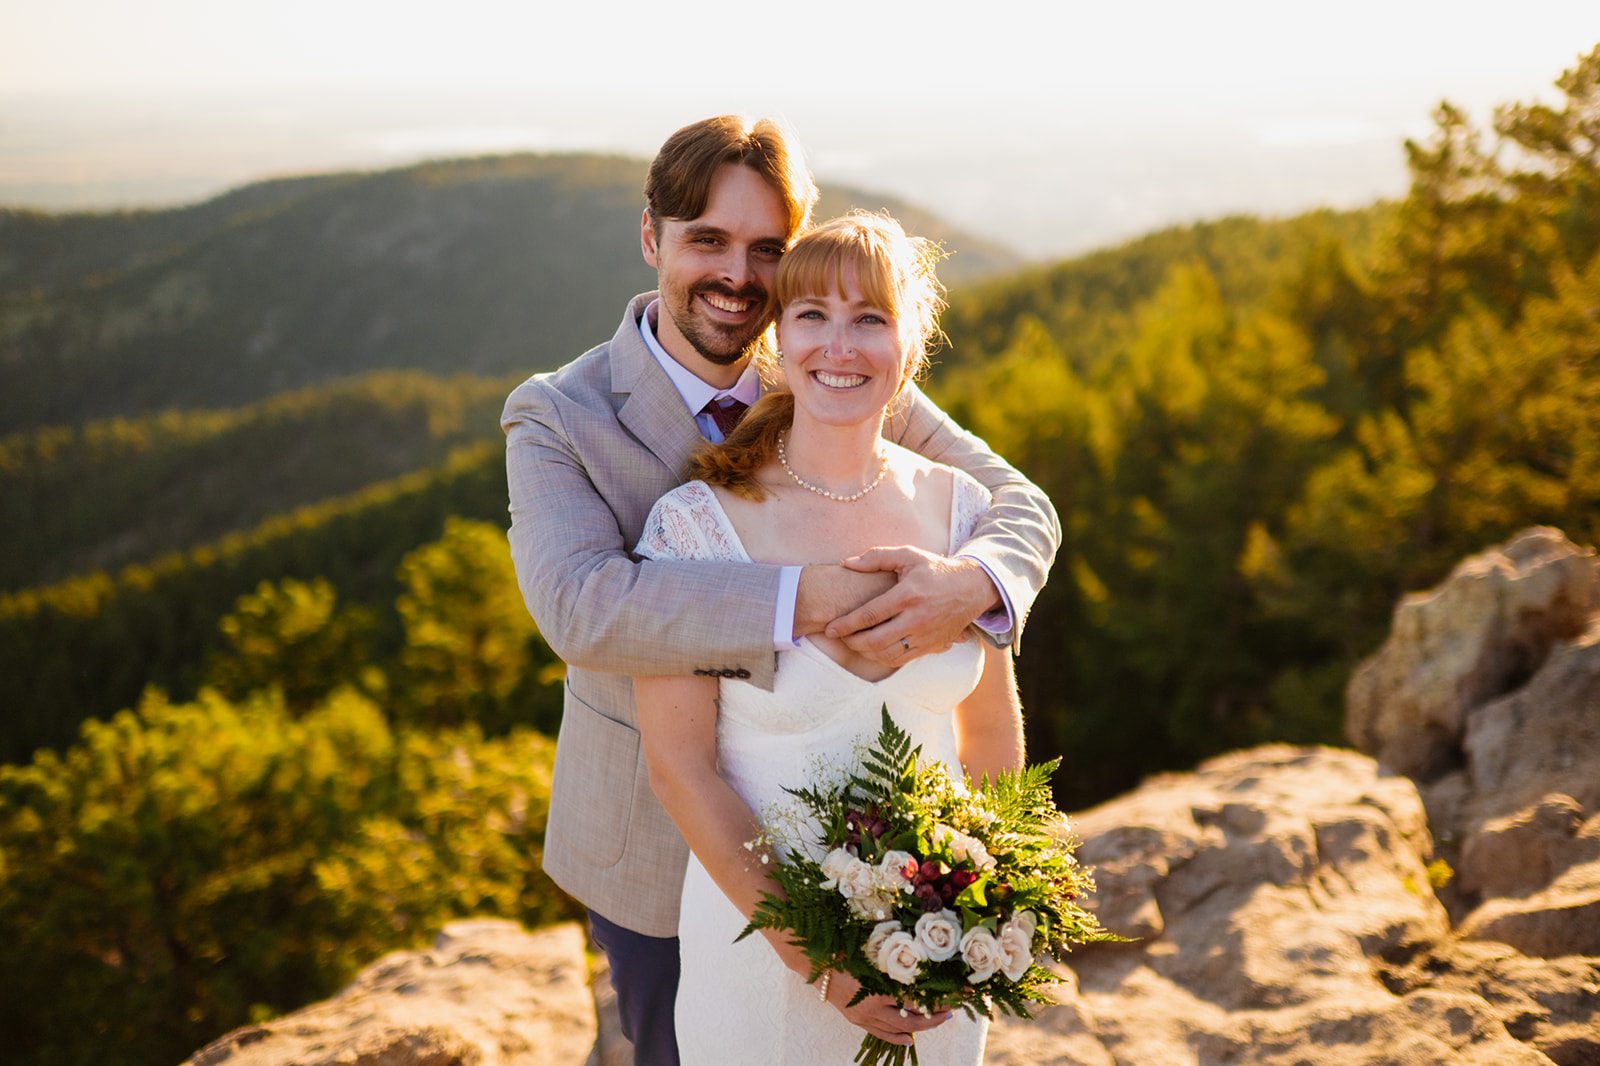 newlyweds at Lost Gulch Overlook after elopement ceremony at sunrise 